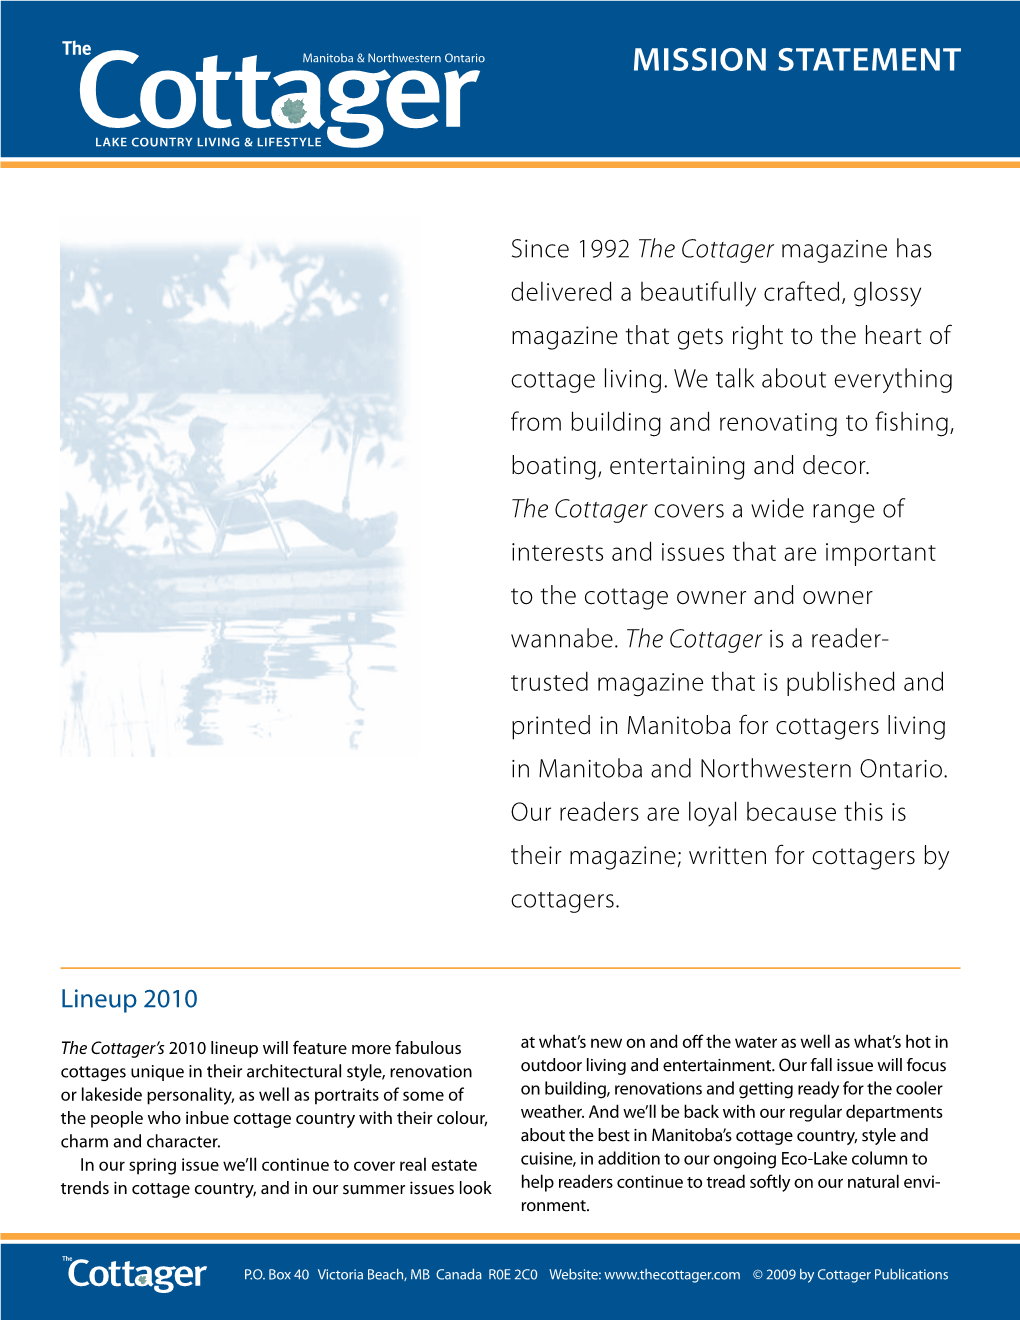 The Cottager Magazine Has Delivered a Beautifully Crafted, Glossy Magazine That Gets Right to the Heart of Cottage Living